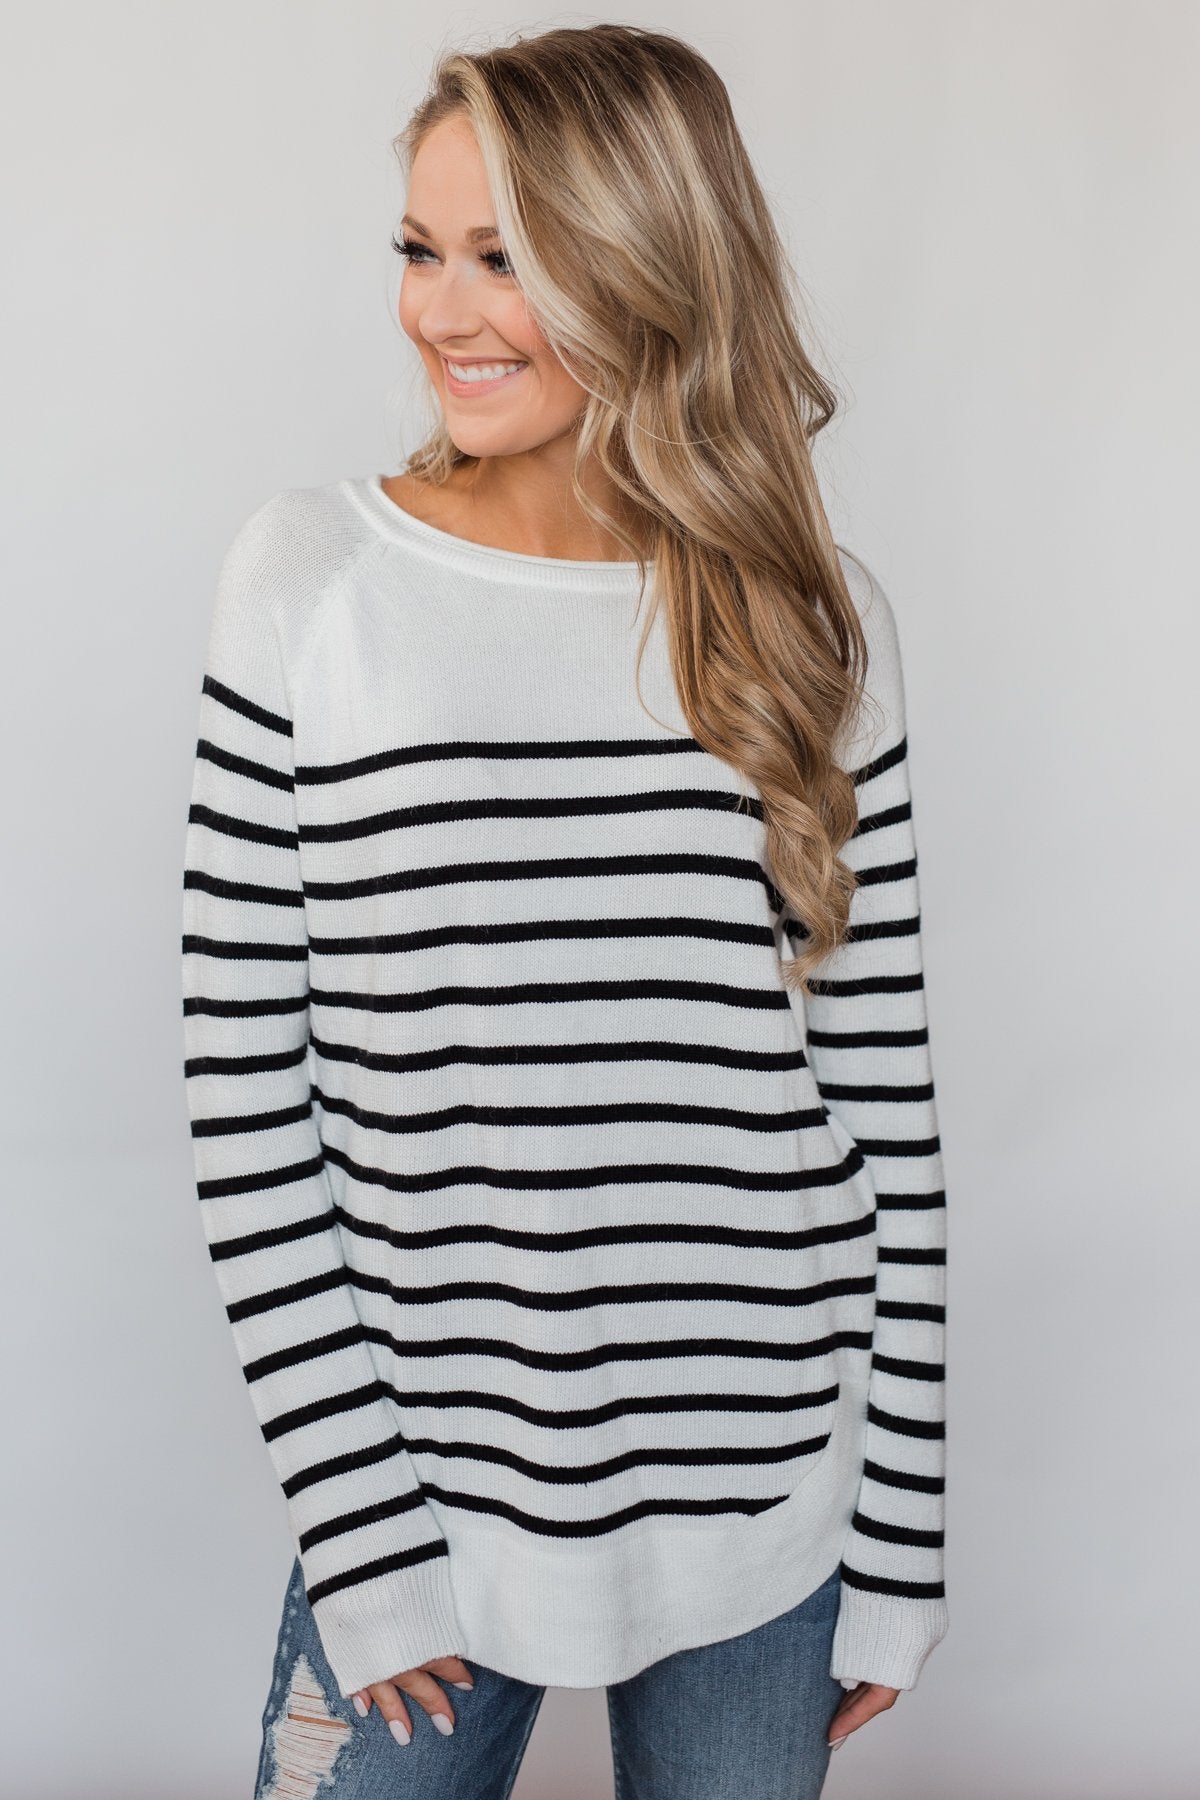 Cozy in Stripes Elbow Patch Sweater - Black & White